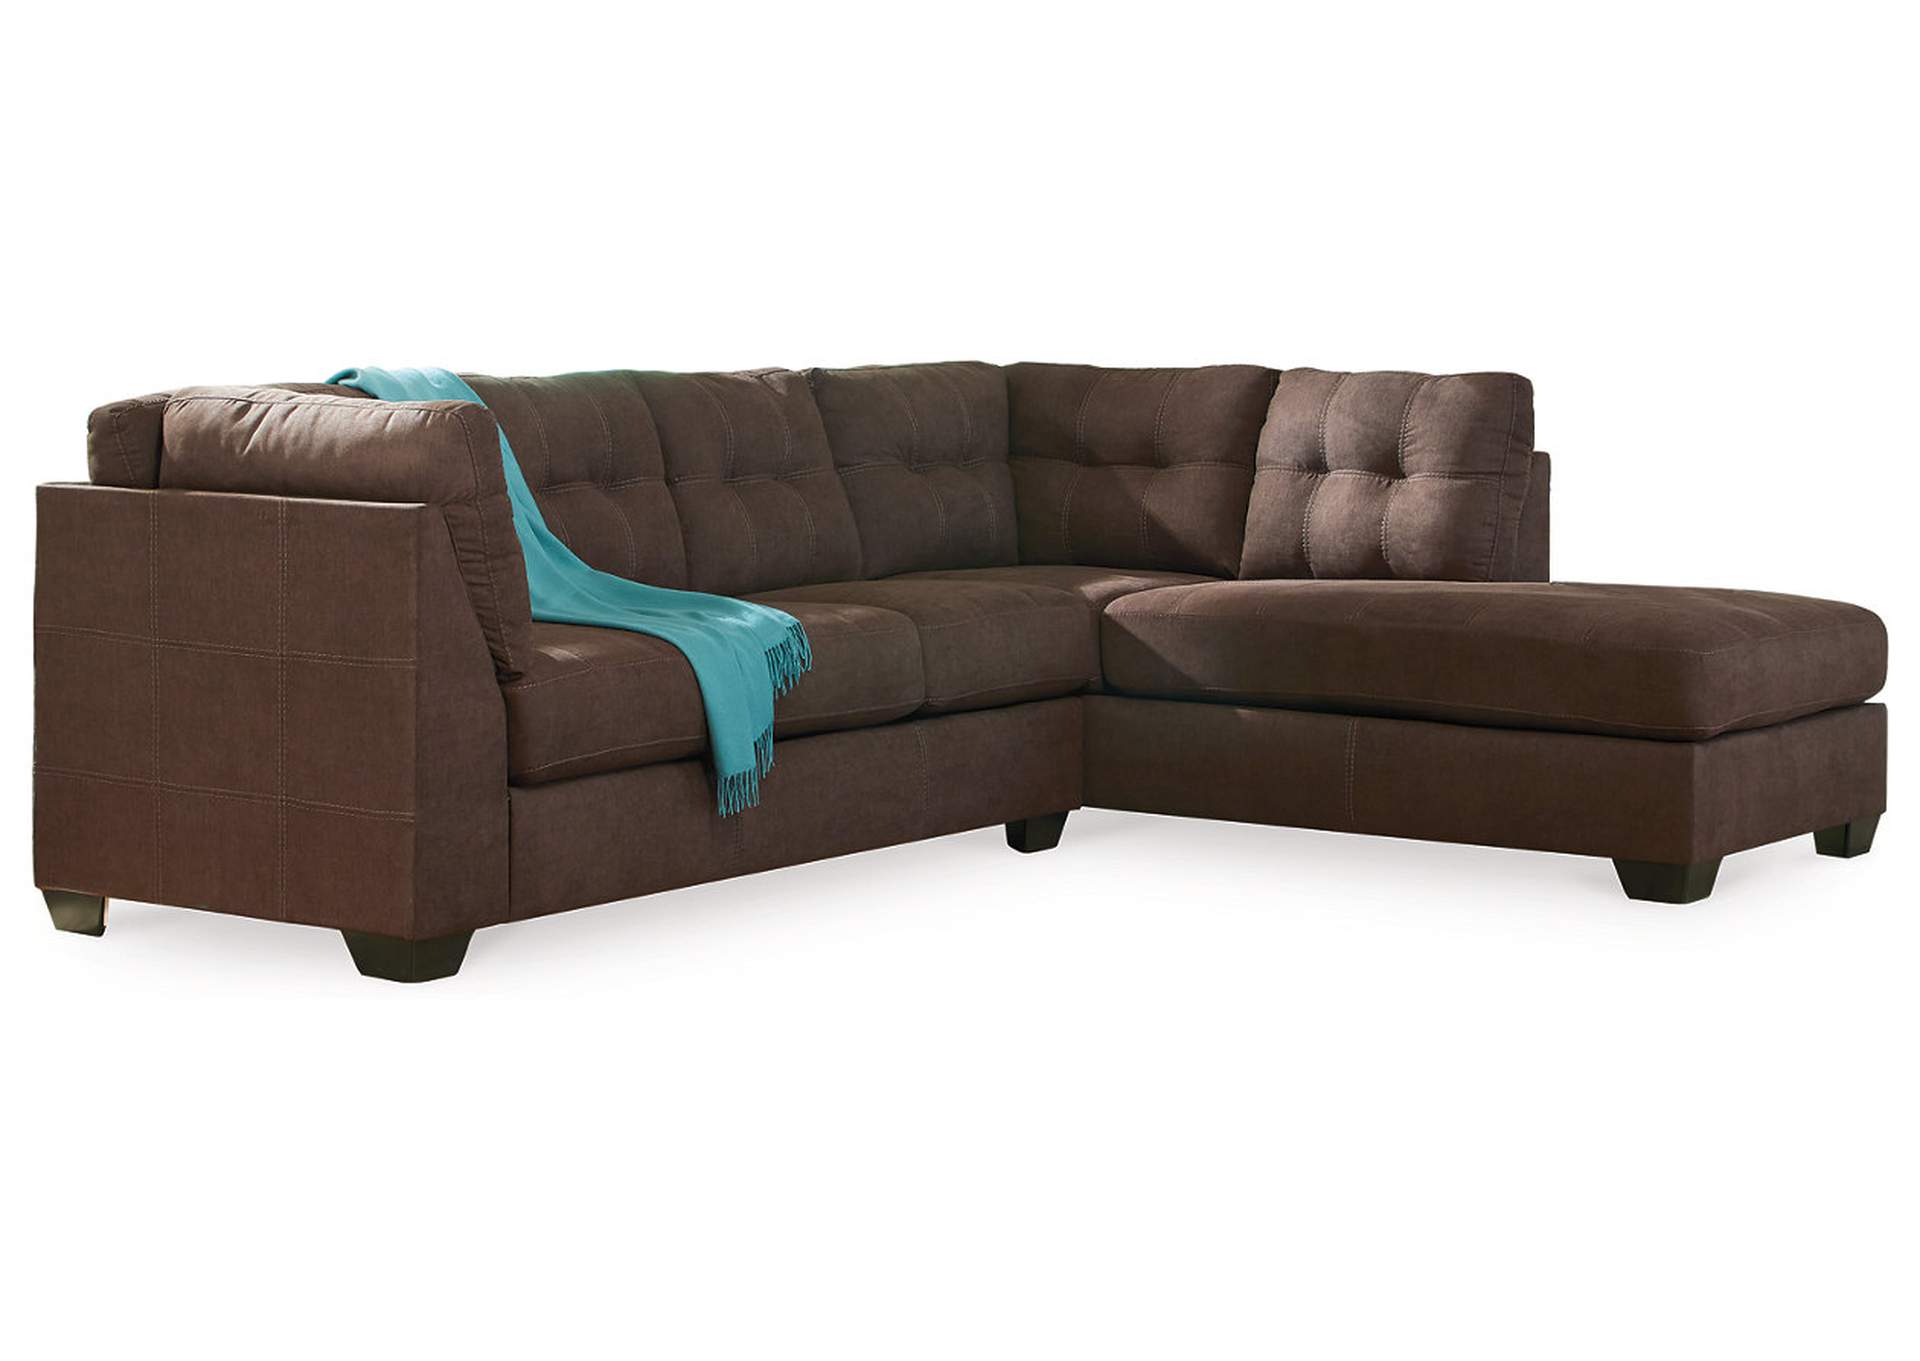 Maier 2-Piece Sectional with Ottoman,Benchcraft